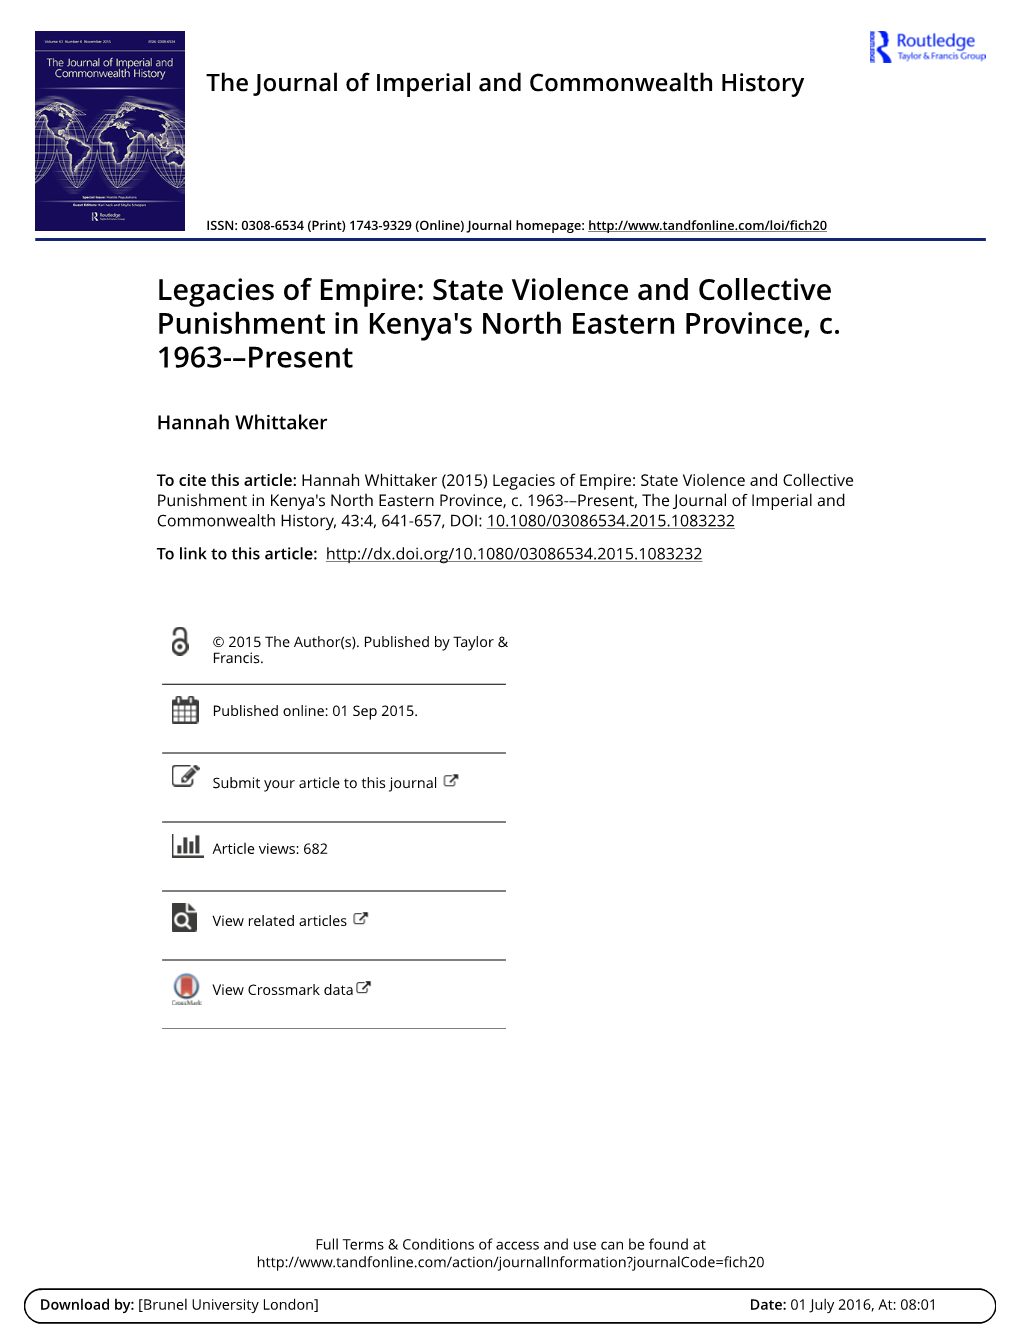 State Violence and Collective Punishment in Kenya's North Eastern Province, C